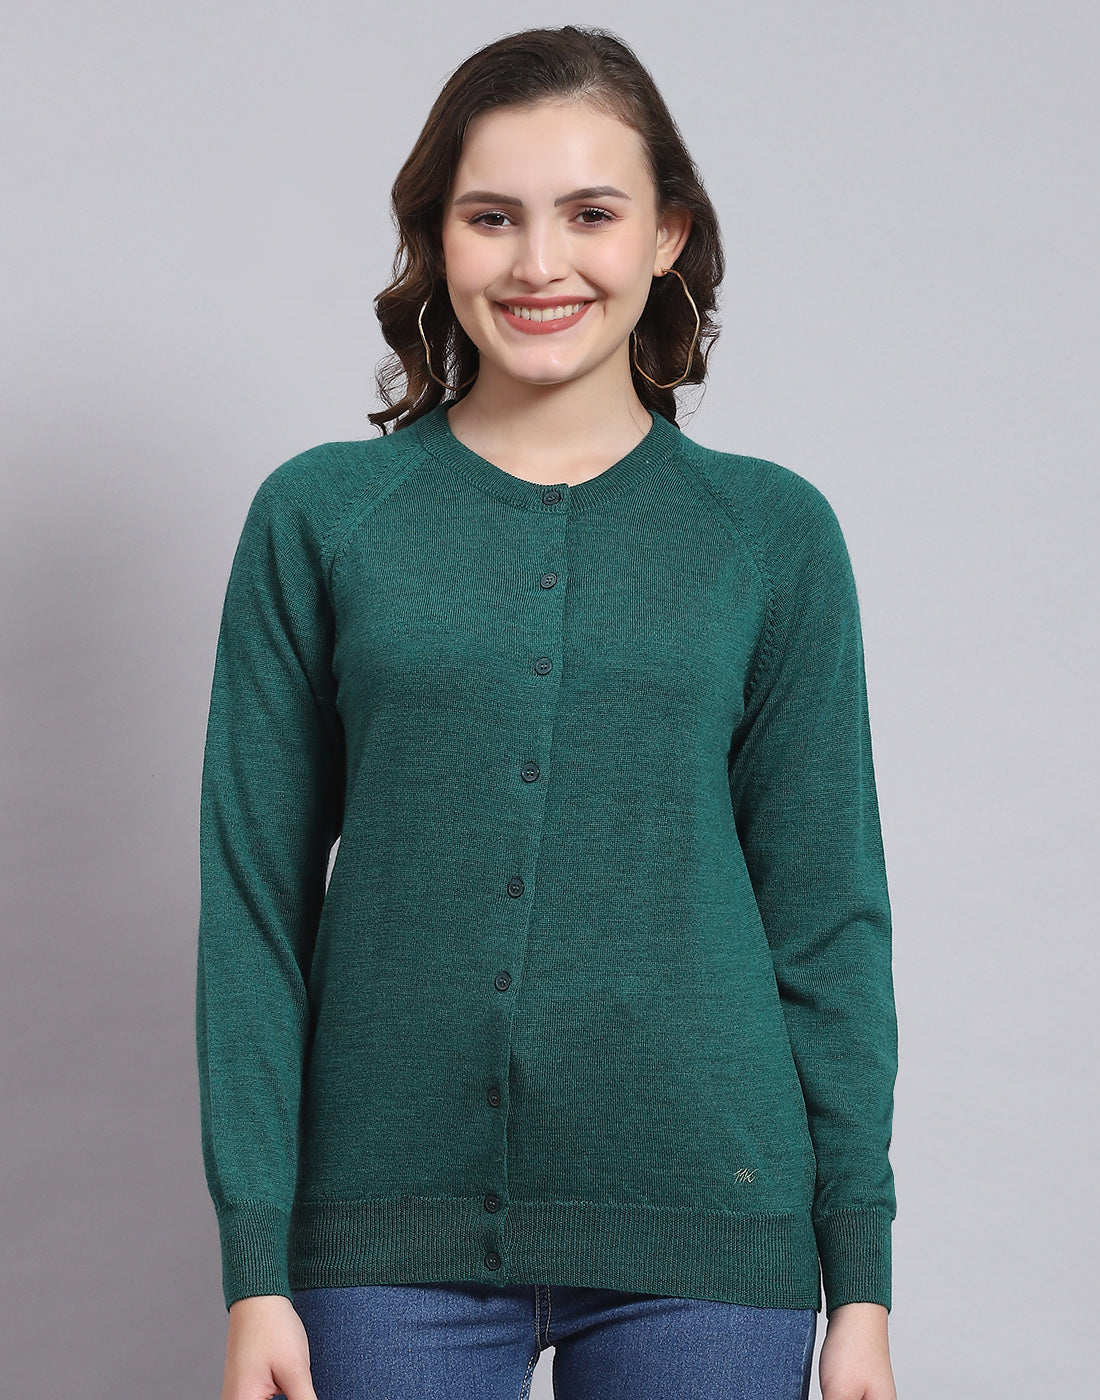 Women Teal Blue Solid Round Neck Full Sleeve Sweater